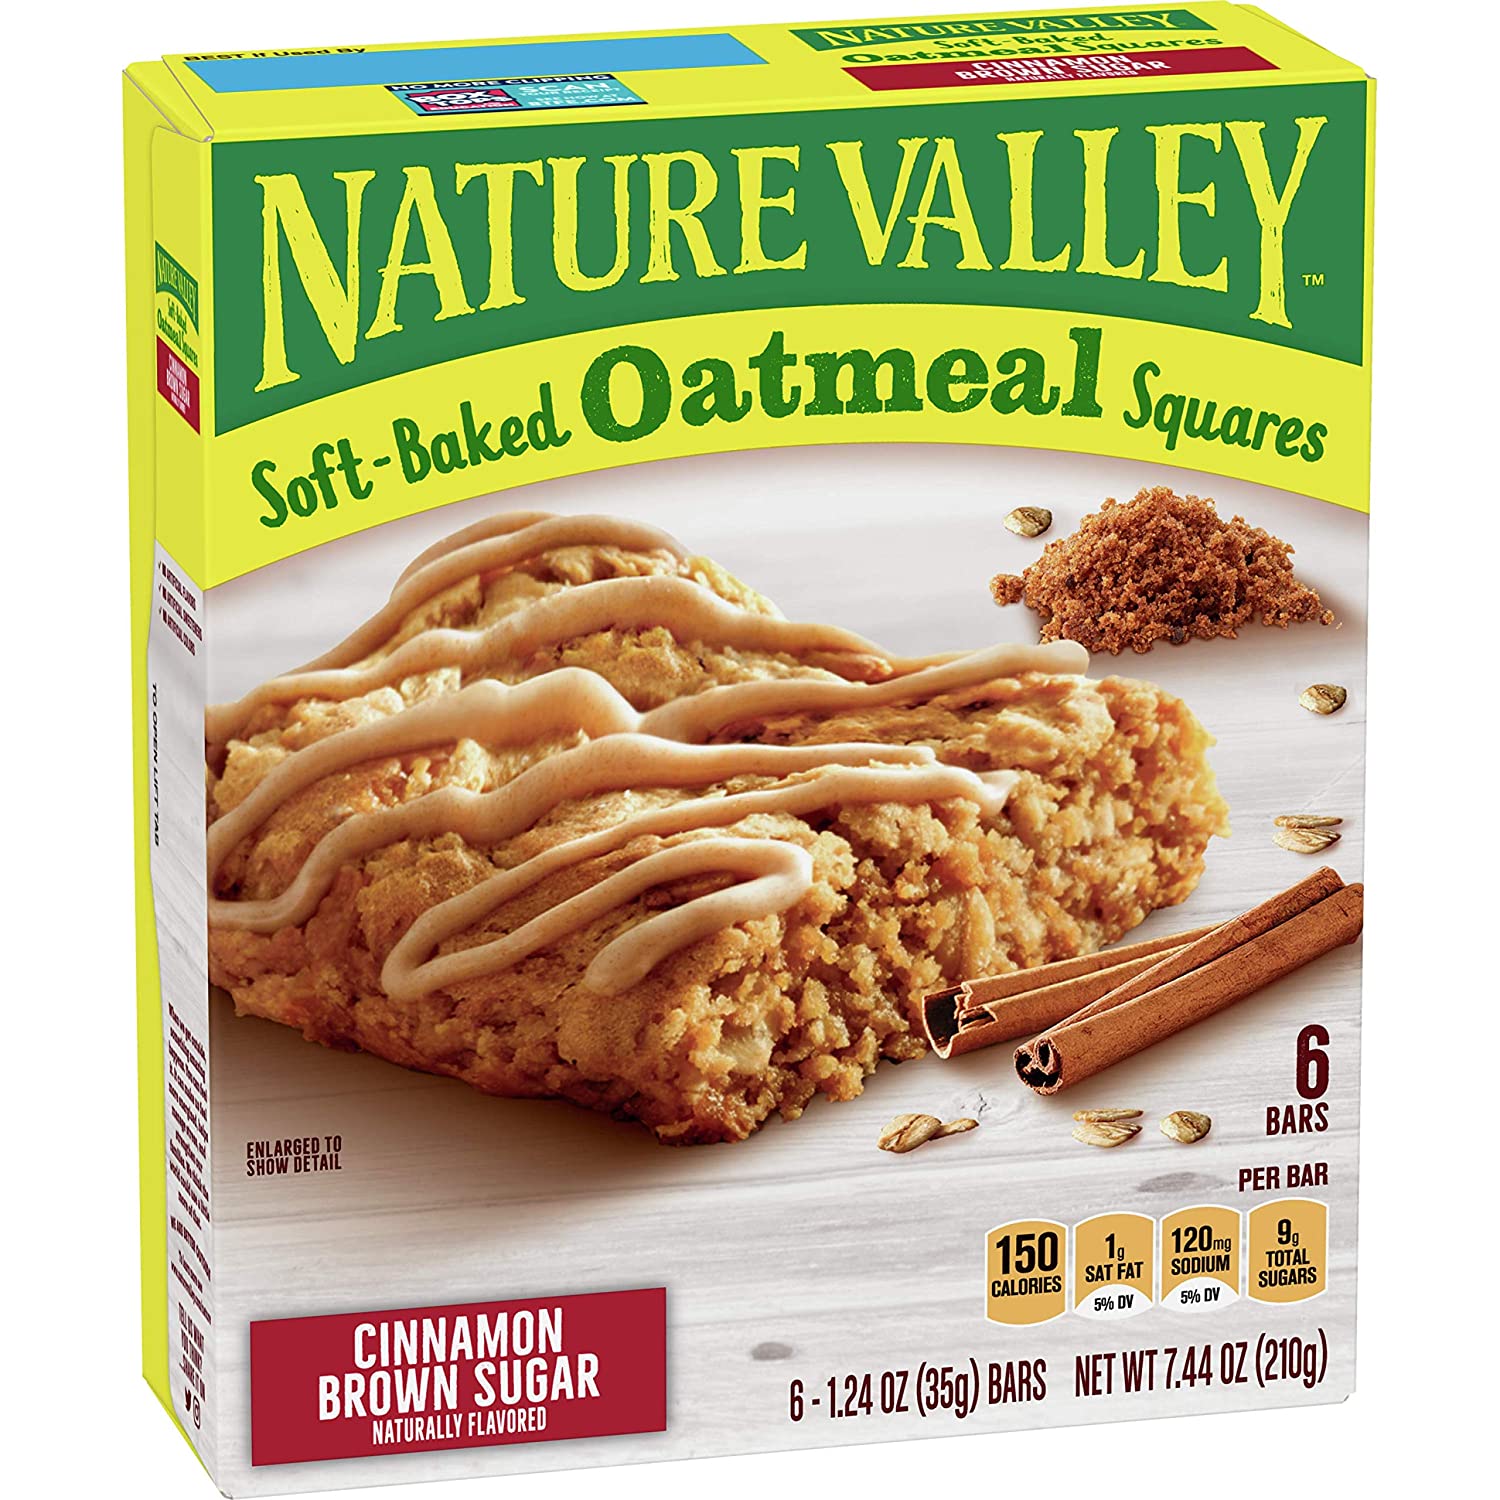 Nature Valley Soft-Baked Oatmeal Squares, Cinnamon Brown Sugar (Pack of 6) $1.41 or less + FS w/ S&S